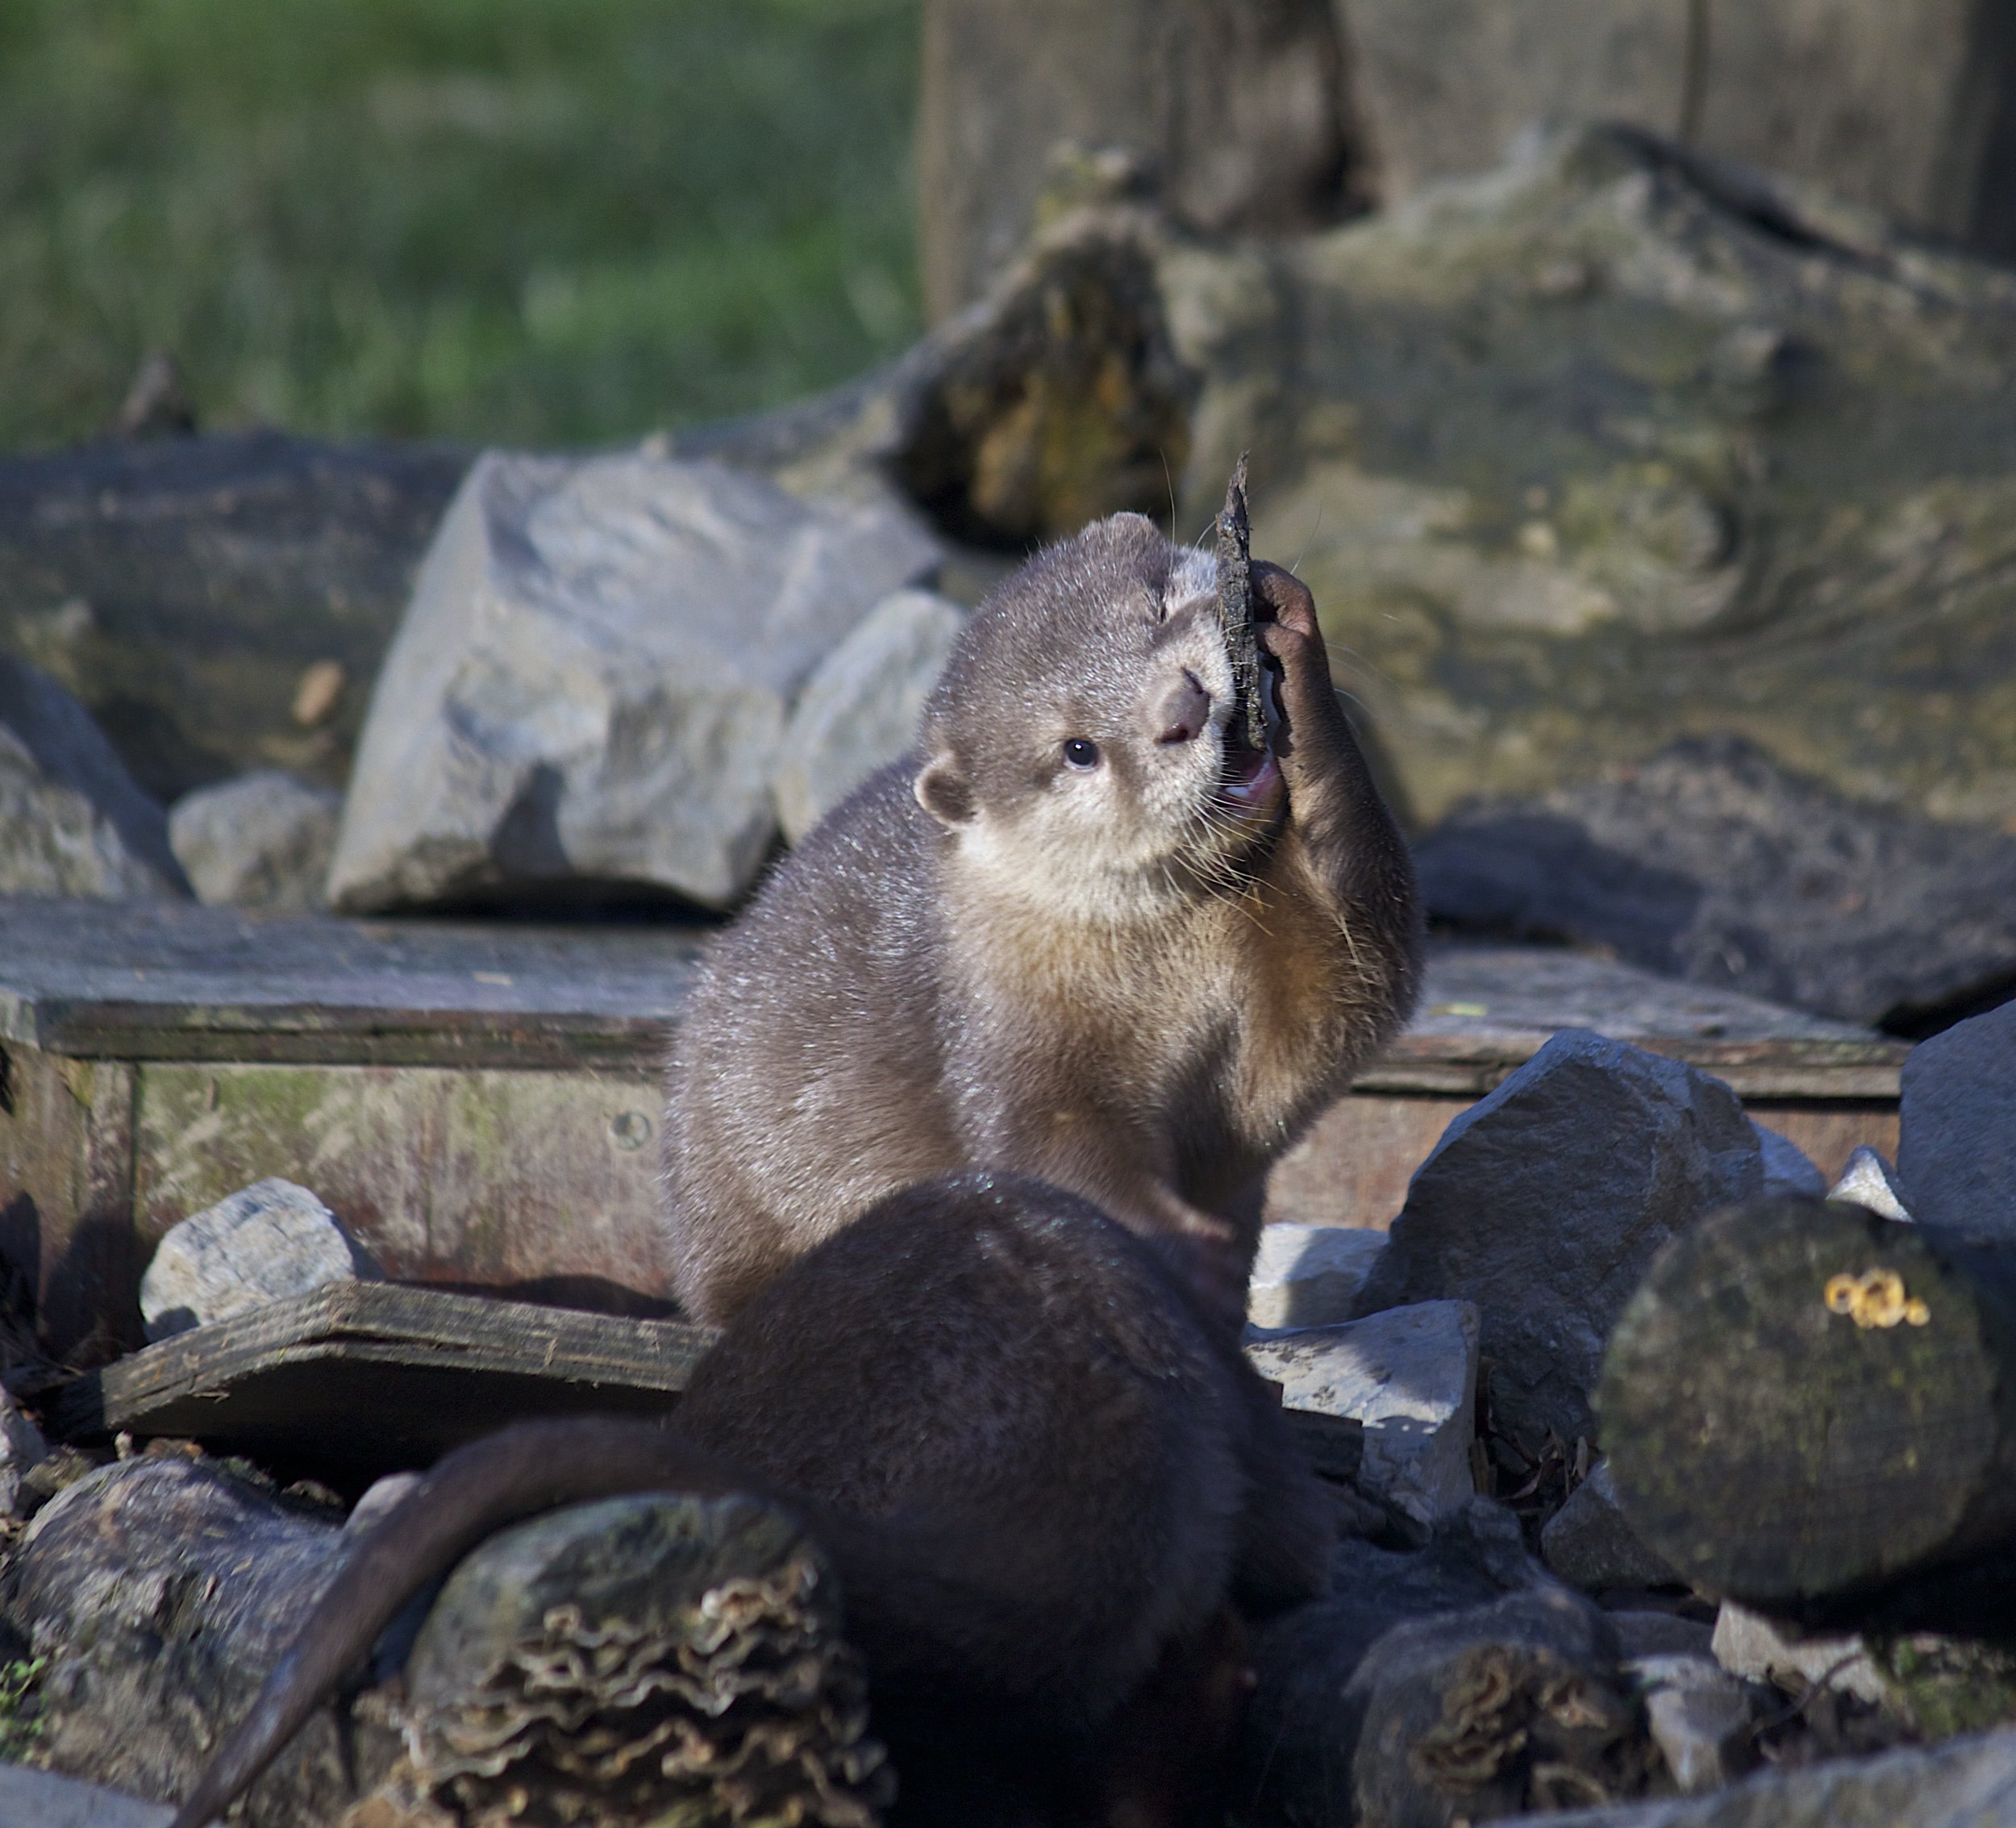 Little Otter, That's Not a Rock You're Trying to Eat, Is It?